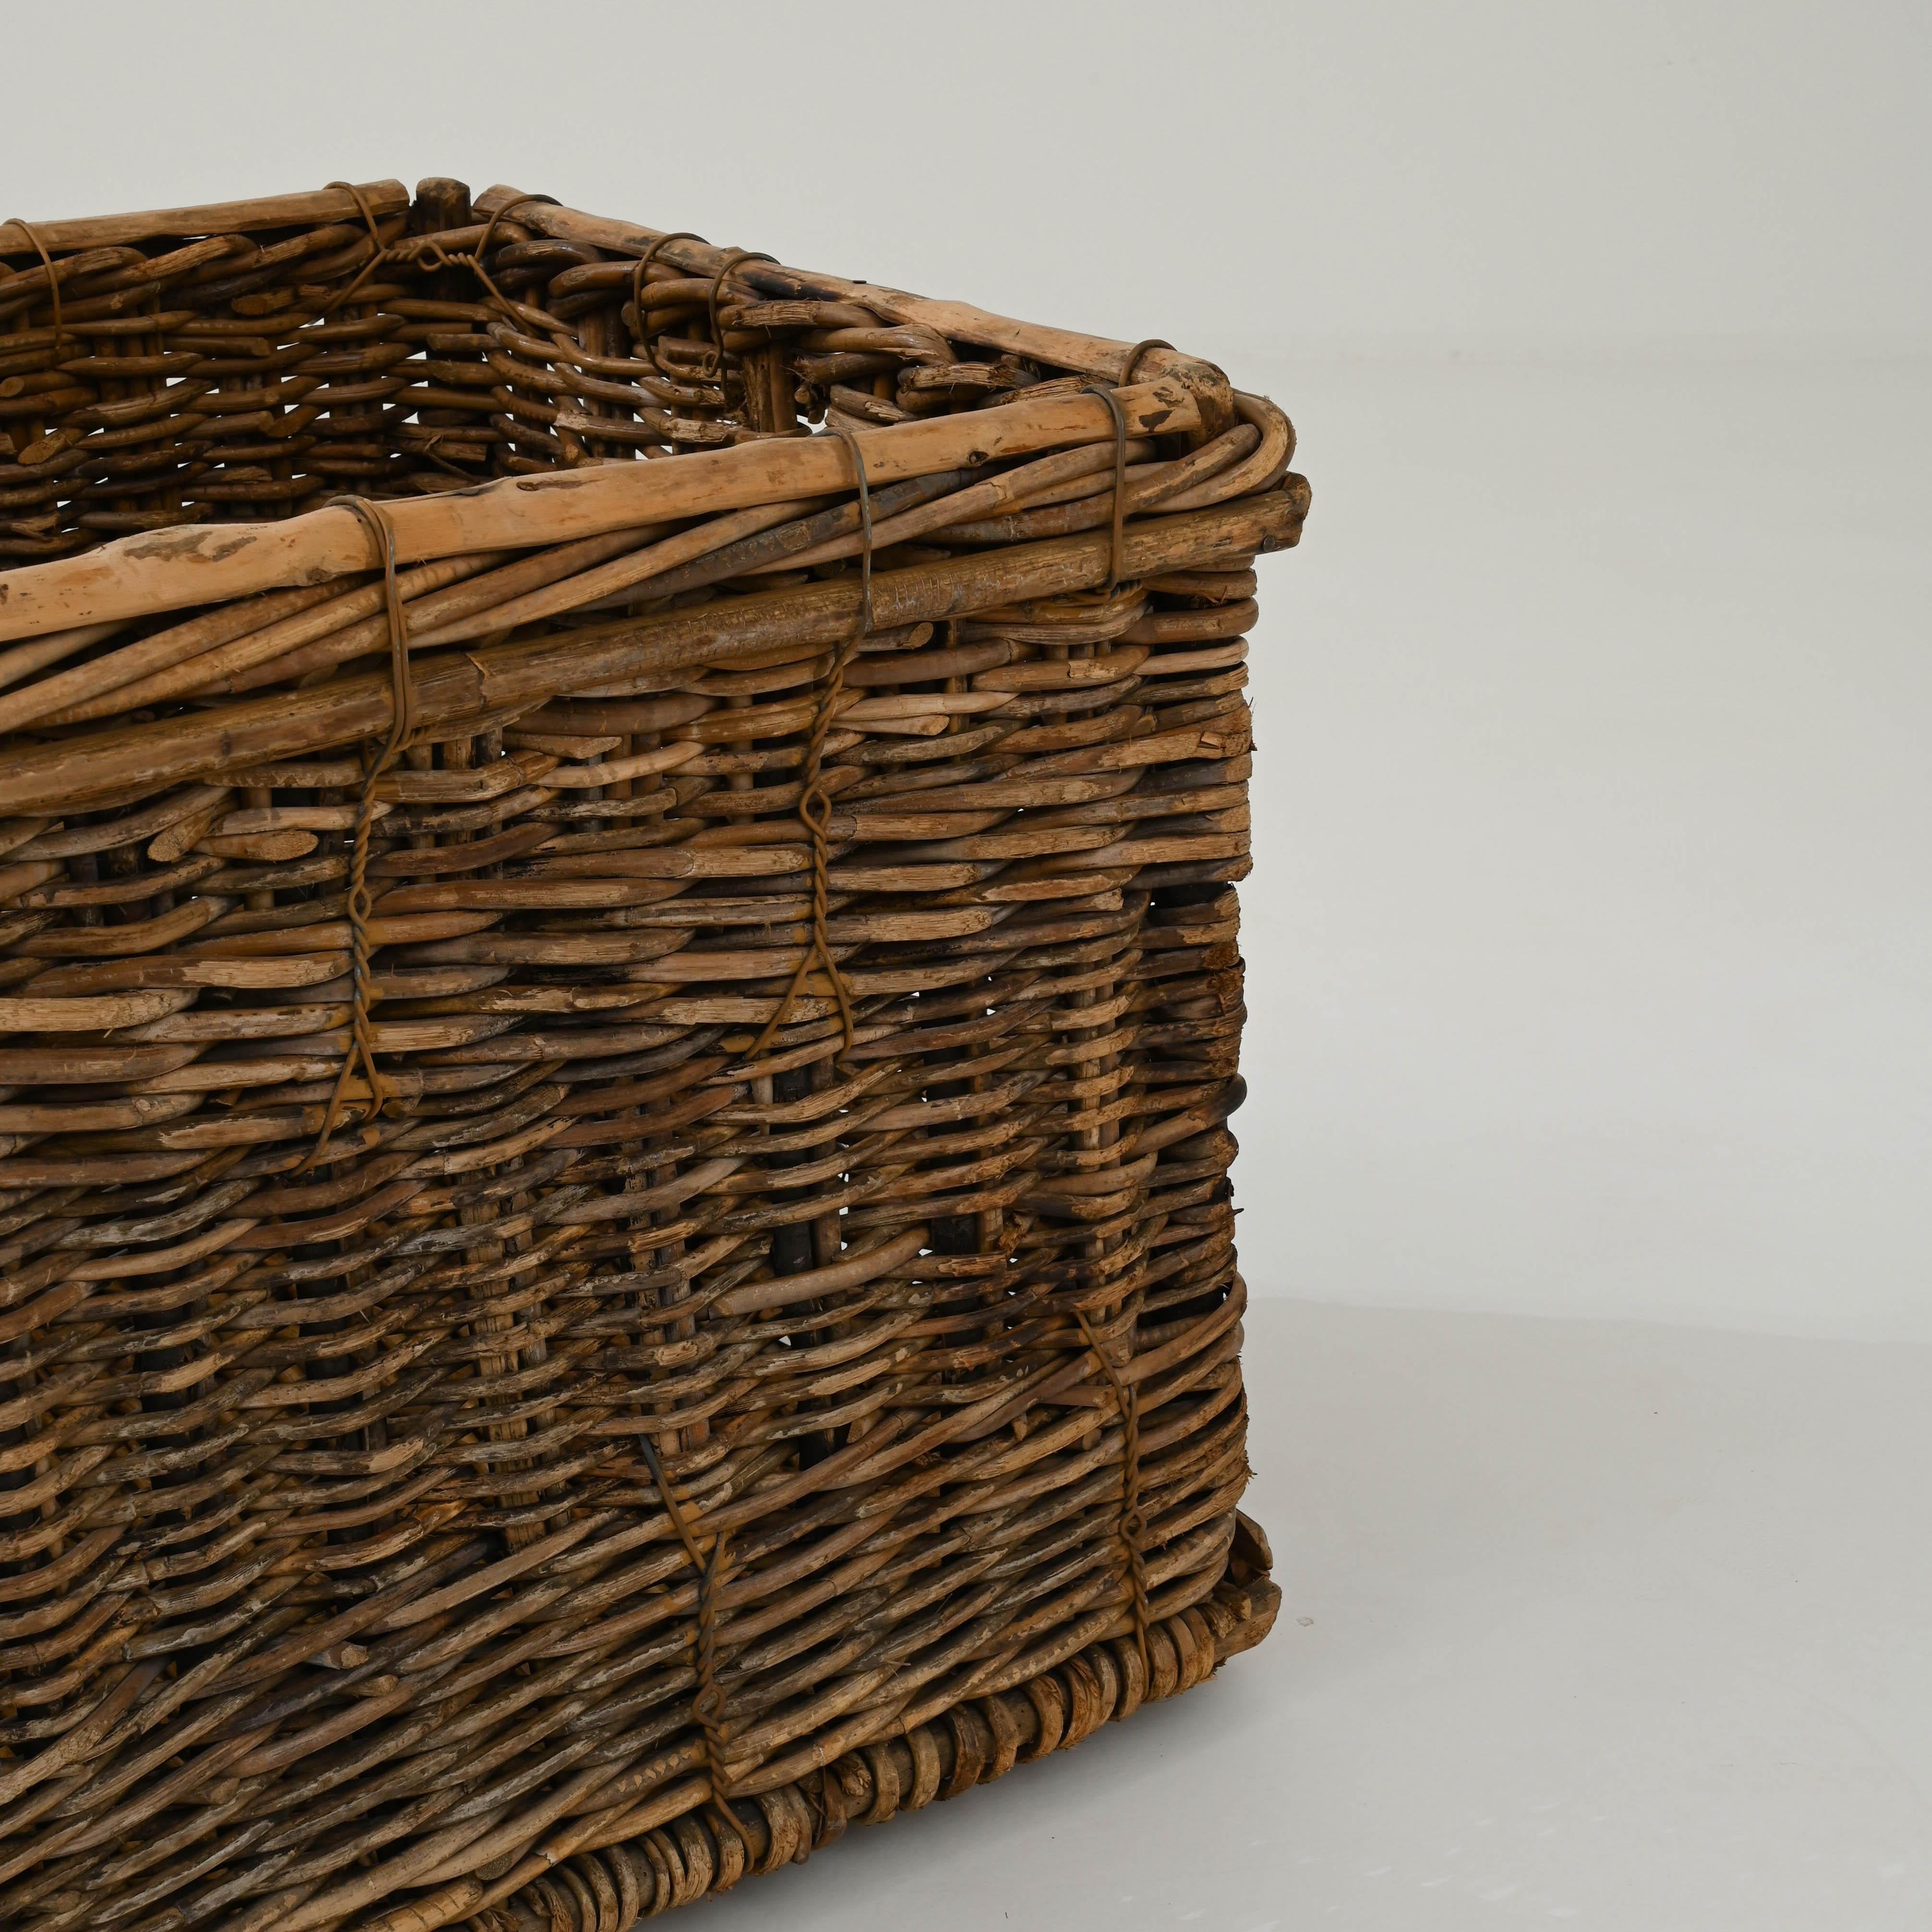 Early 20th Century French Wicker Basket 3